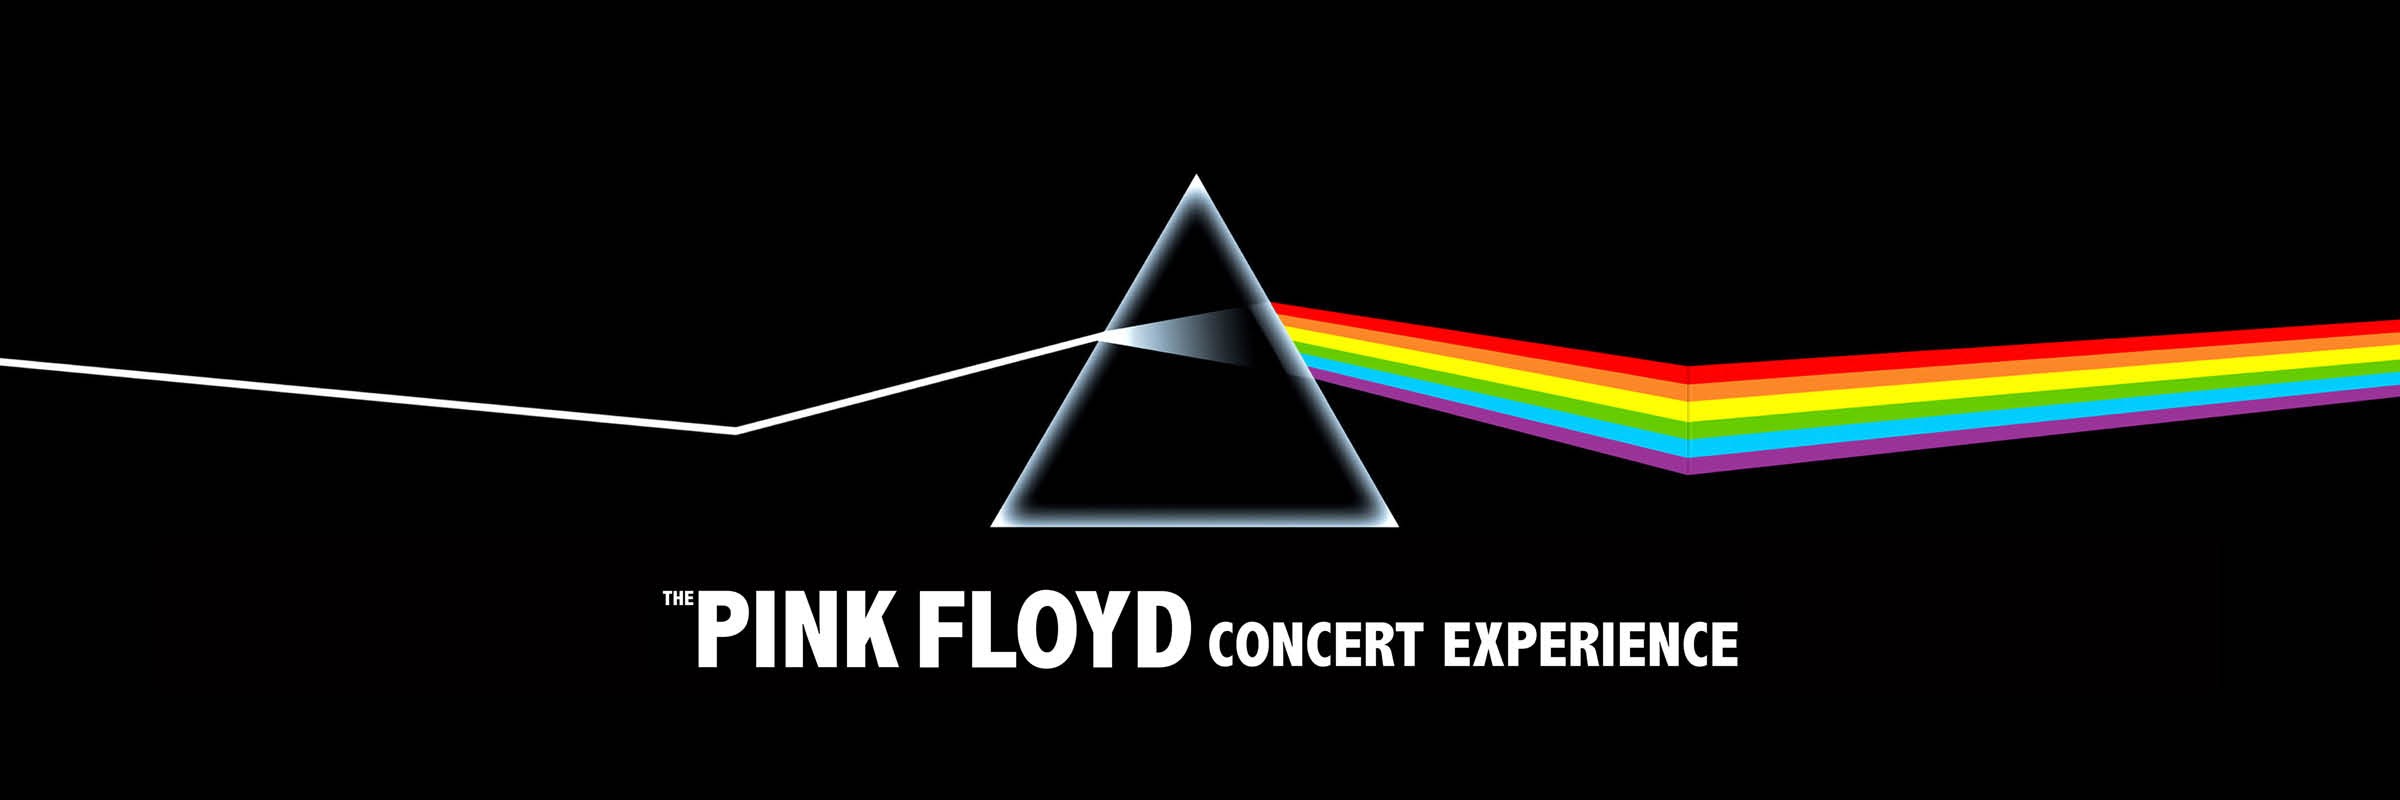 The Pink Floyd Concert Experience